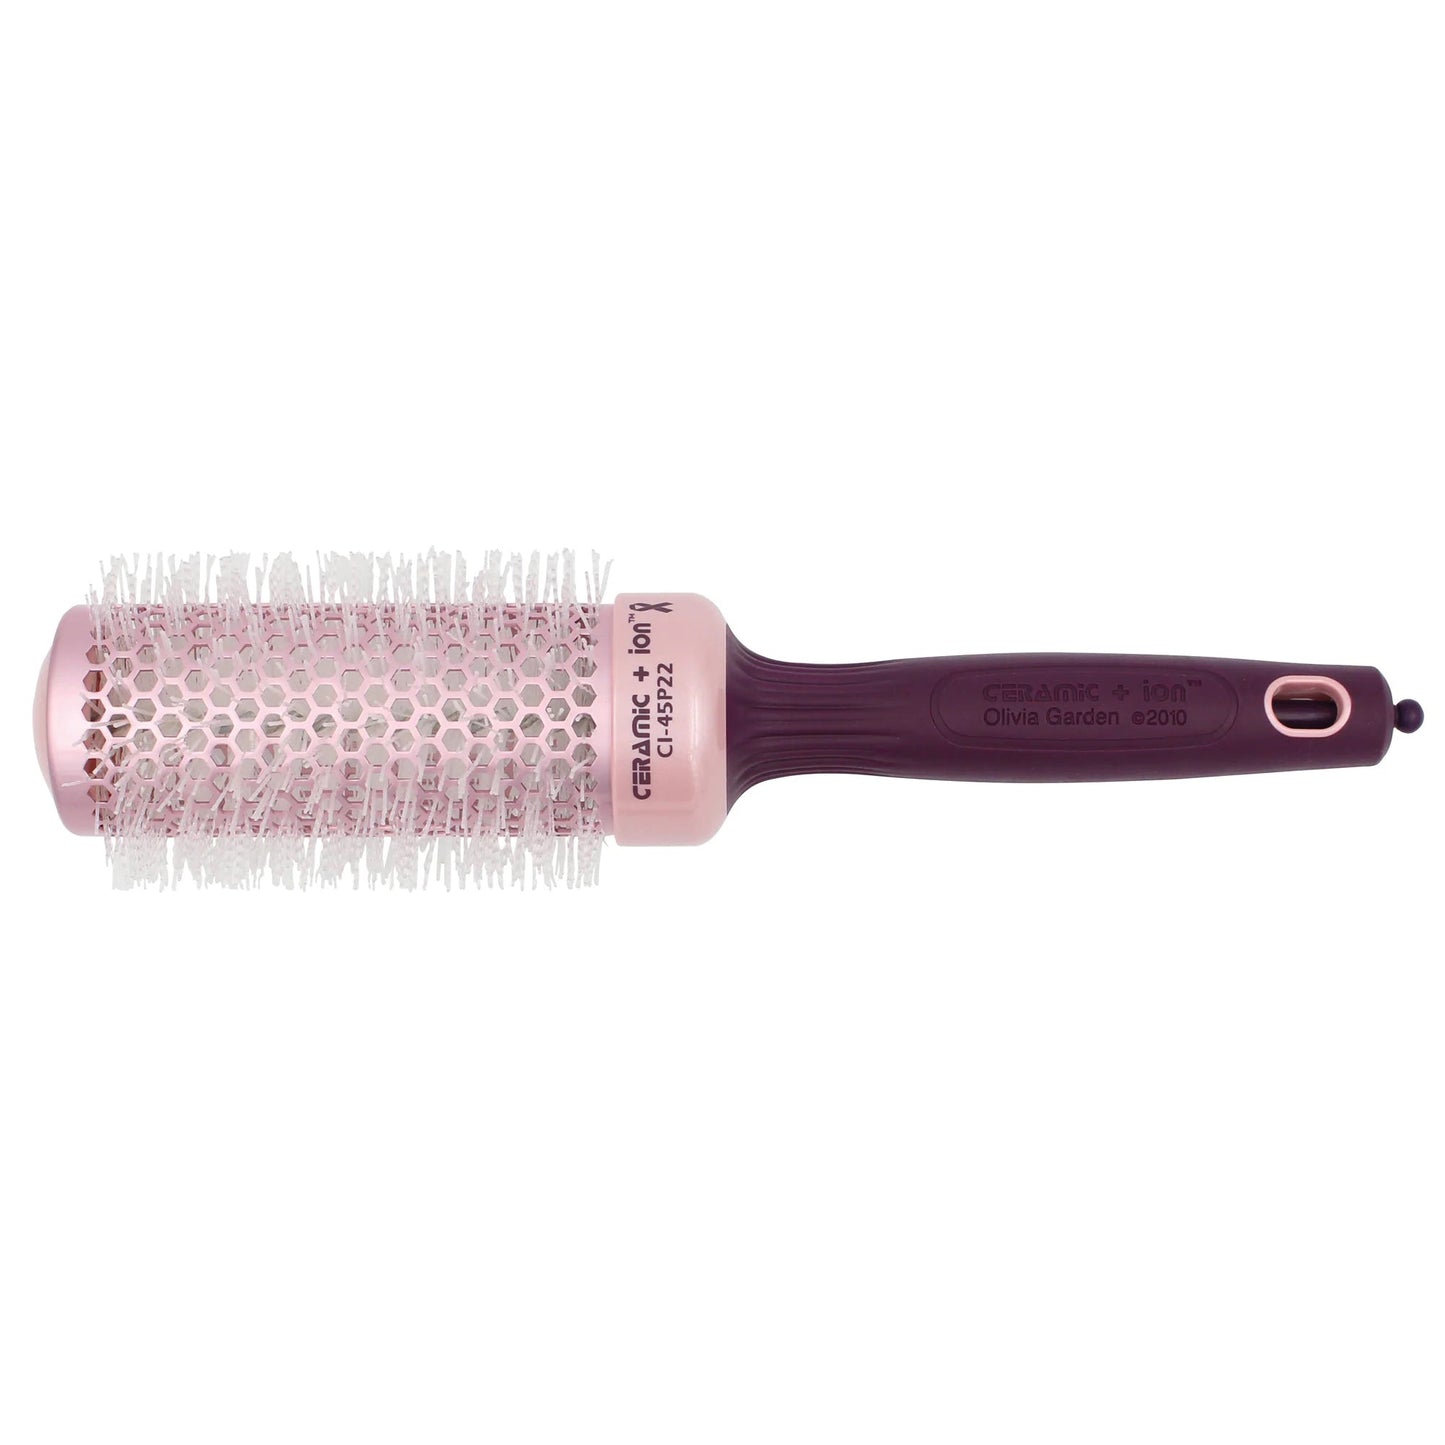 CI-45P22 | 1 3/4" | 2022 Breast Cancer Awareness Special Edition | OLIVIA GARDEN COMBS & BRUSHES OLIVIA GARDEN 